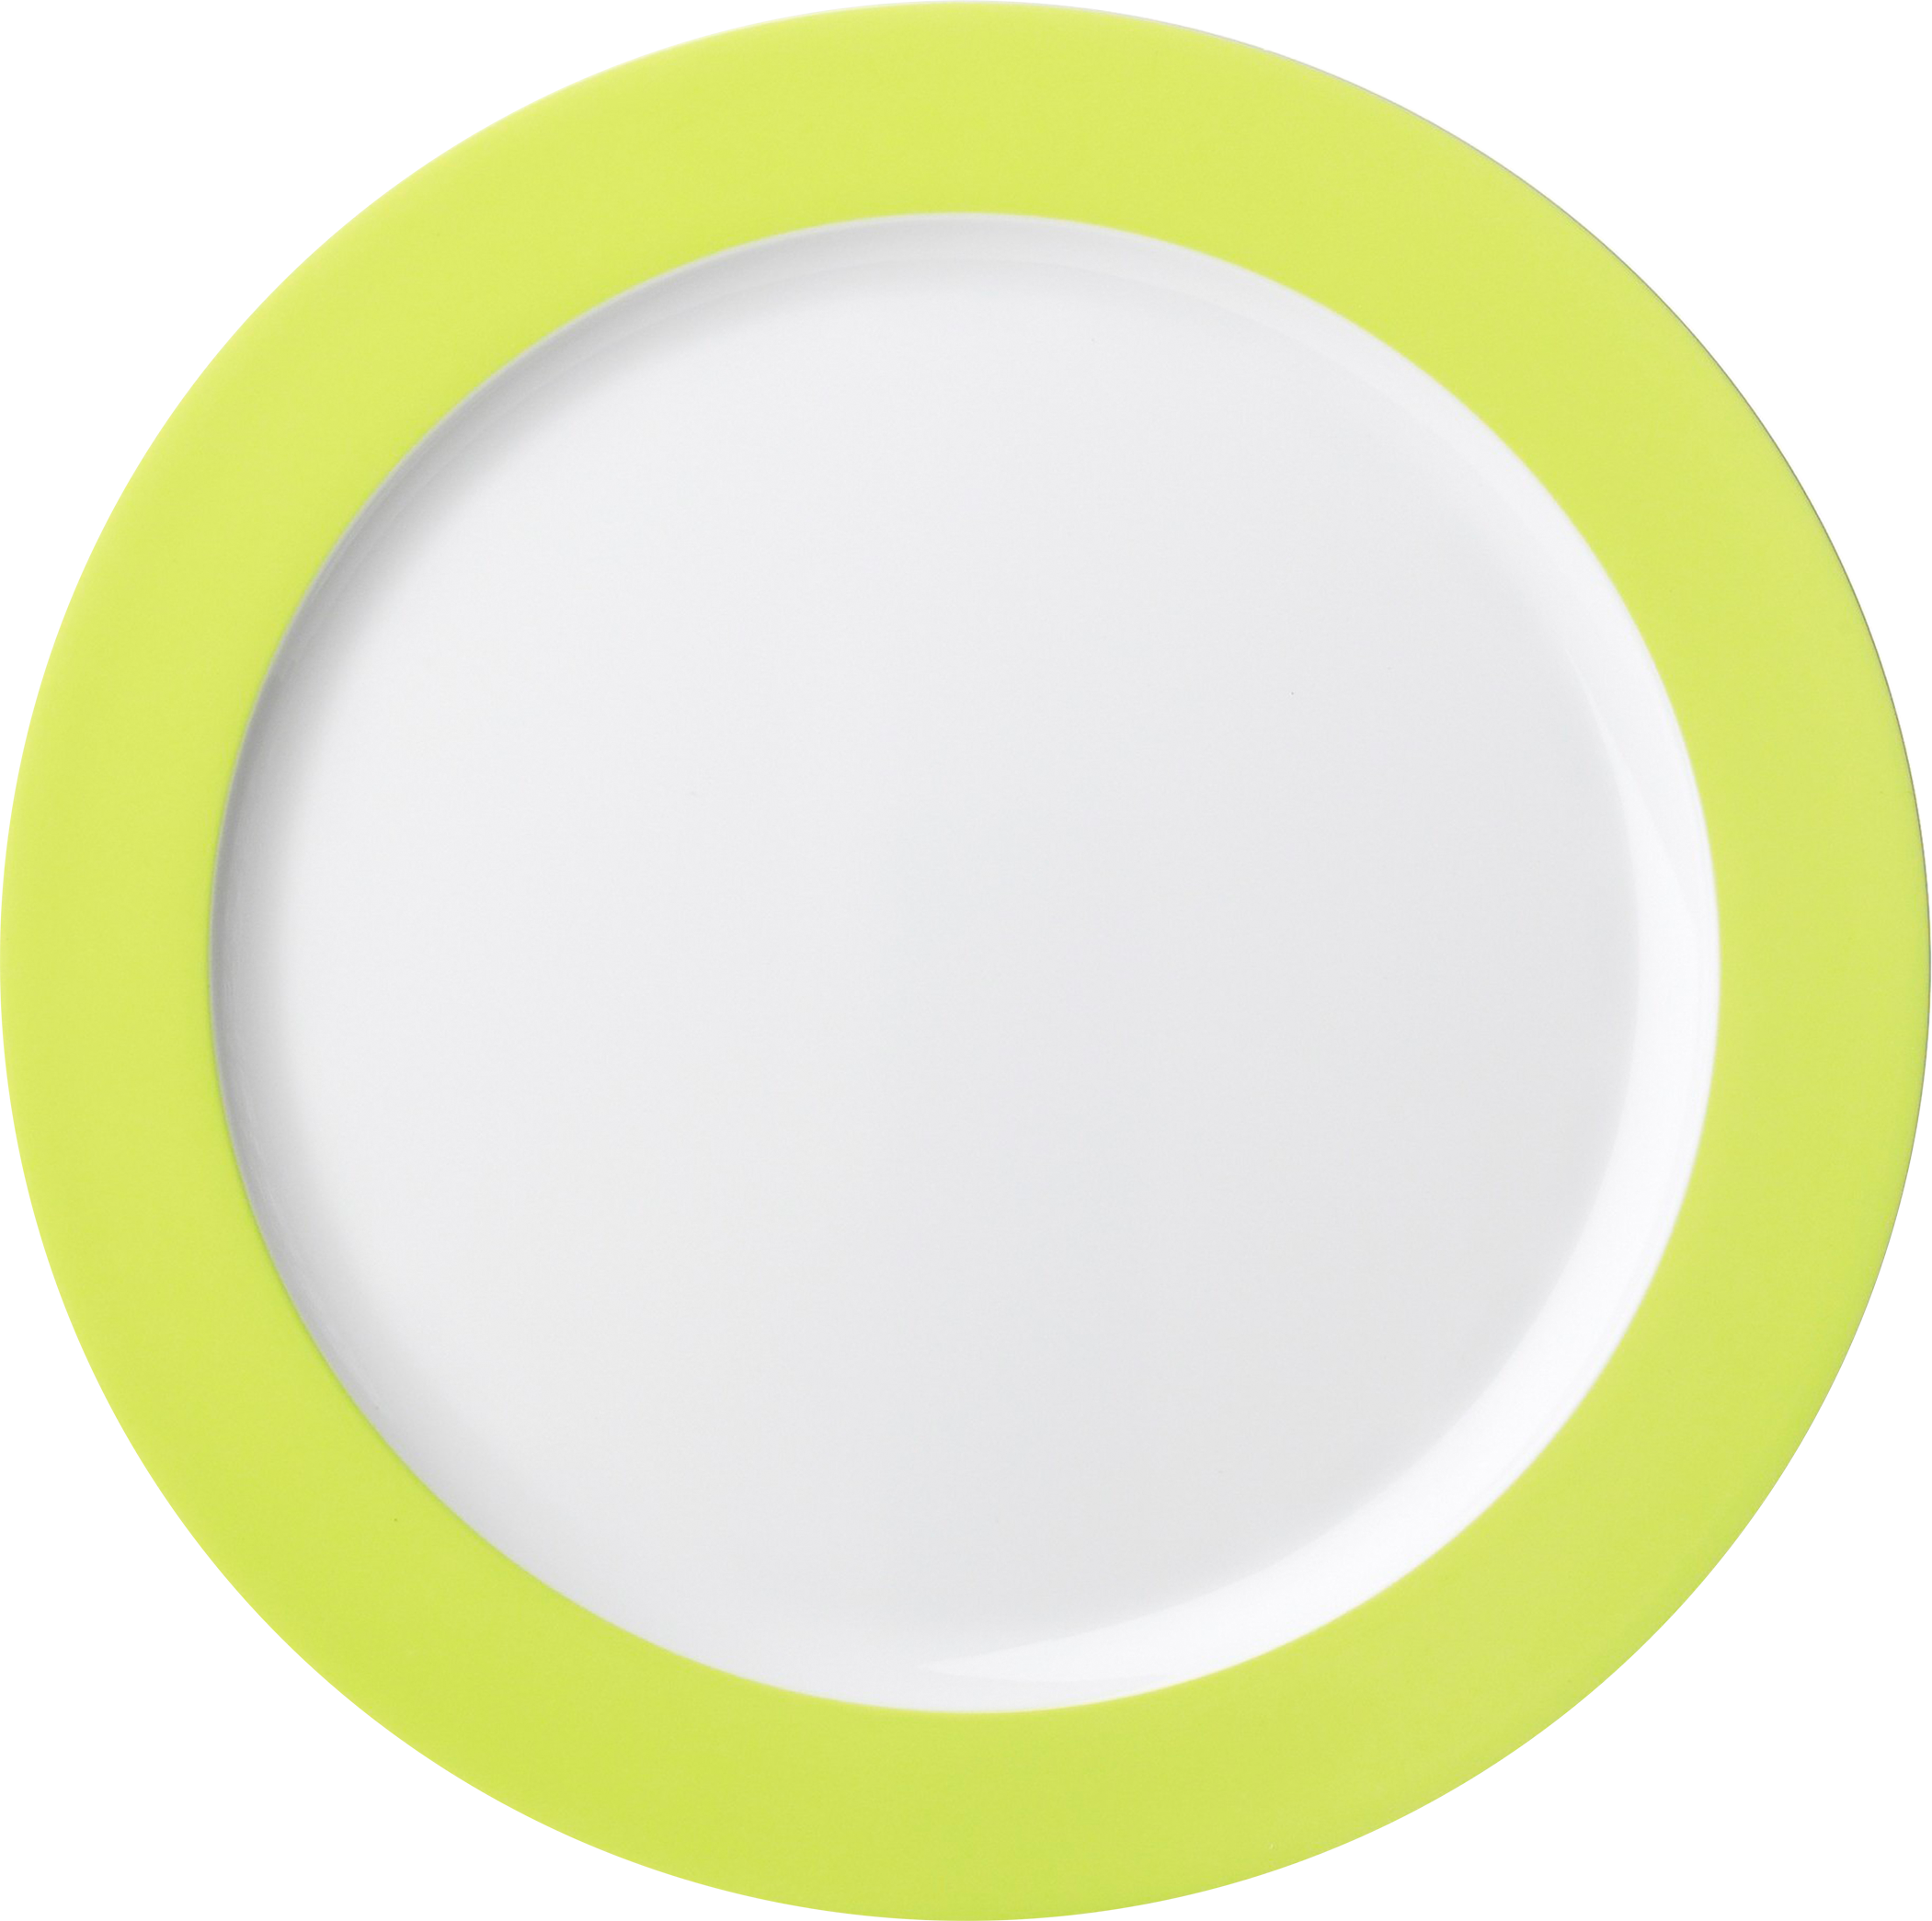 Plate Png Image - Plate, Transparent background PNG HD thumbnail